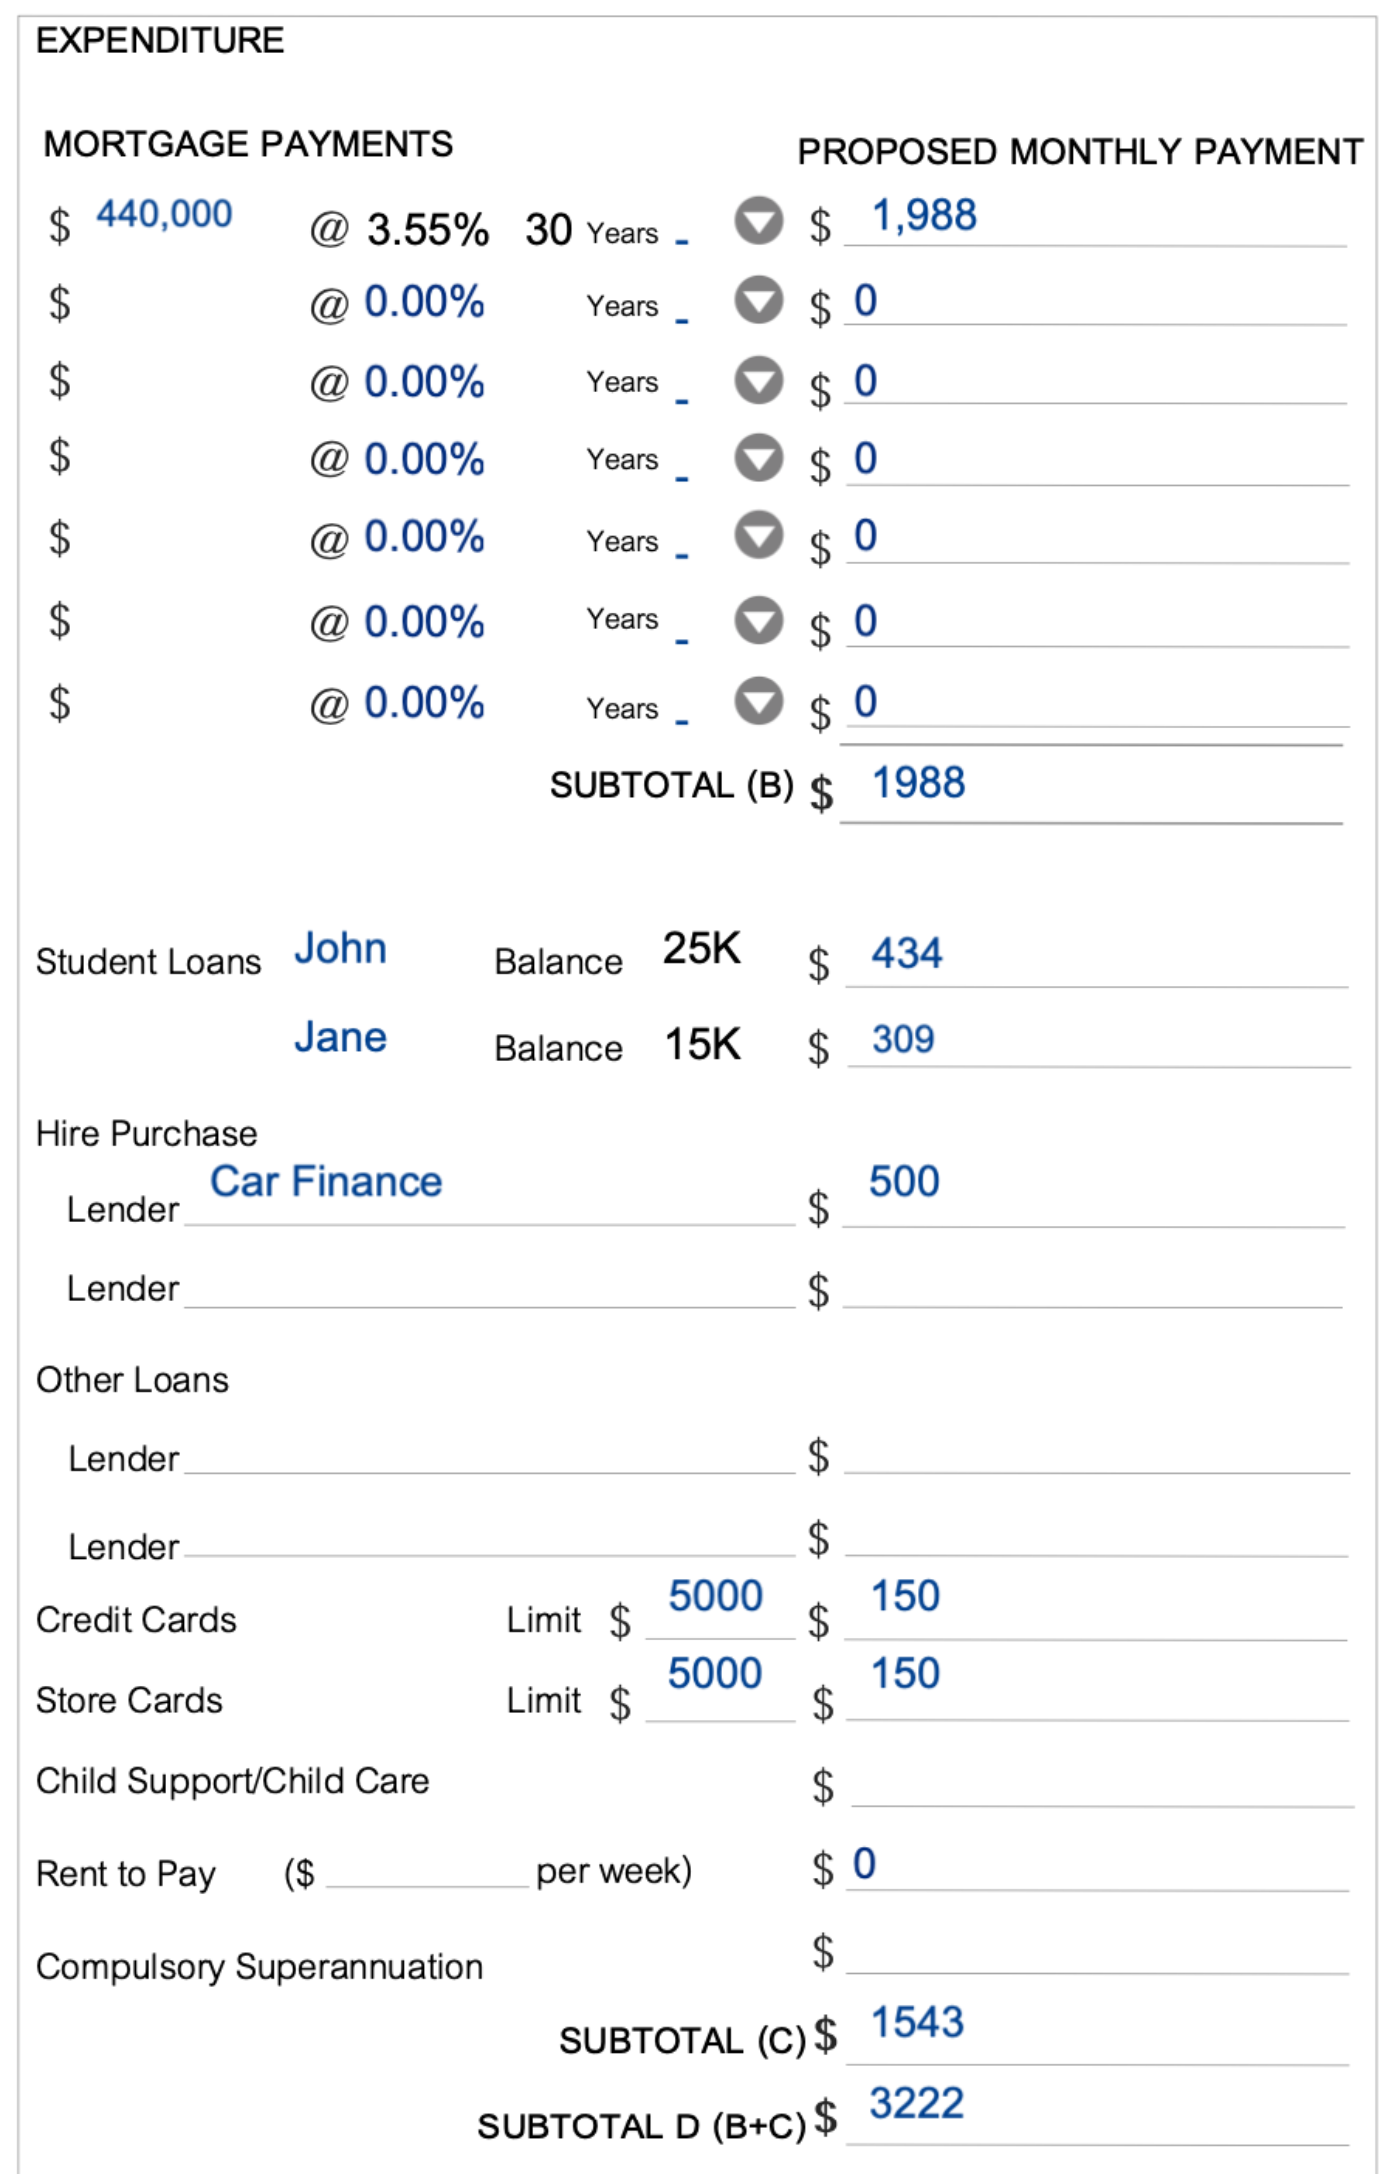 Mortgage Application Example Page 4 Expenses Details 1